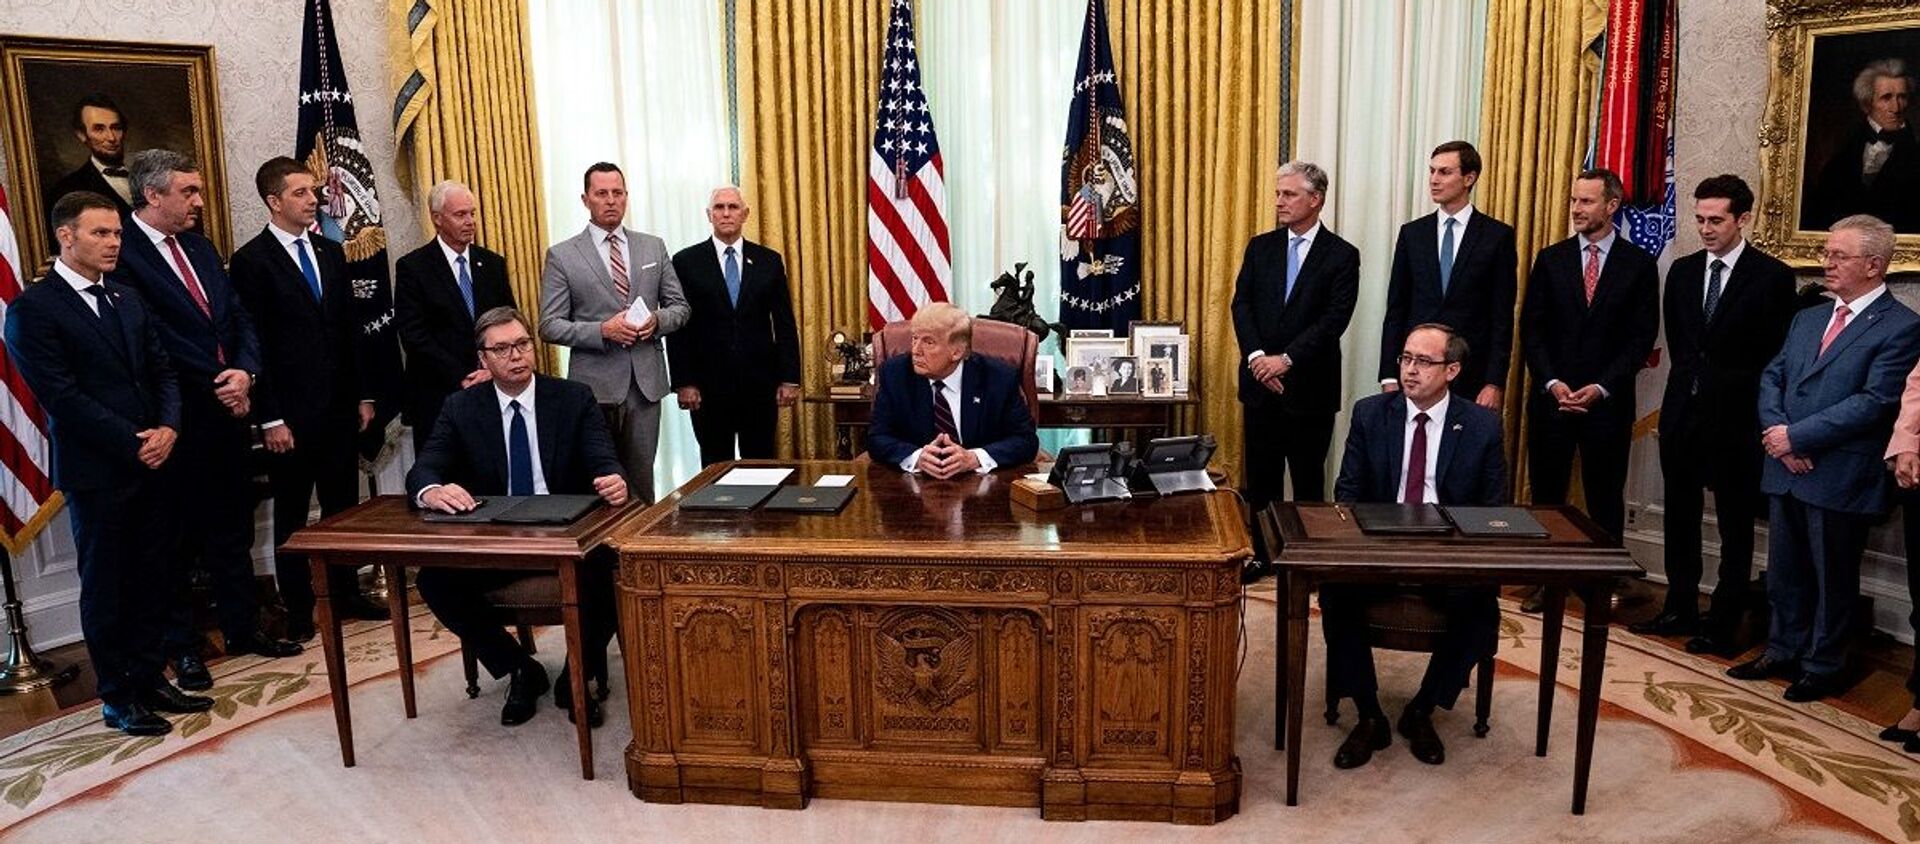 resident Donald Trump (C) participates in a signing ceremony and meeting with the President of Serbia Aleksandar Vucic (L) and the Prime Minister of Kosovo Avdullah Hoti (R) in the Oval Office of the White House on September 4, 2020 in Washington, DC.  - 俄罗斯卫星通讯社, 1920, 05.09.2020